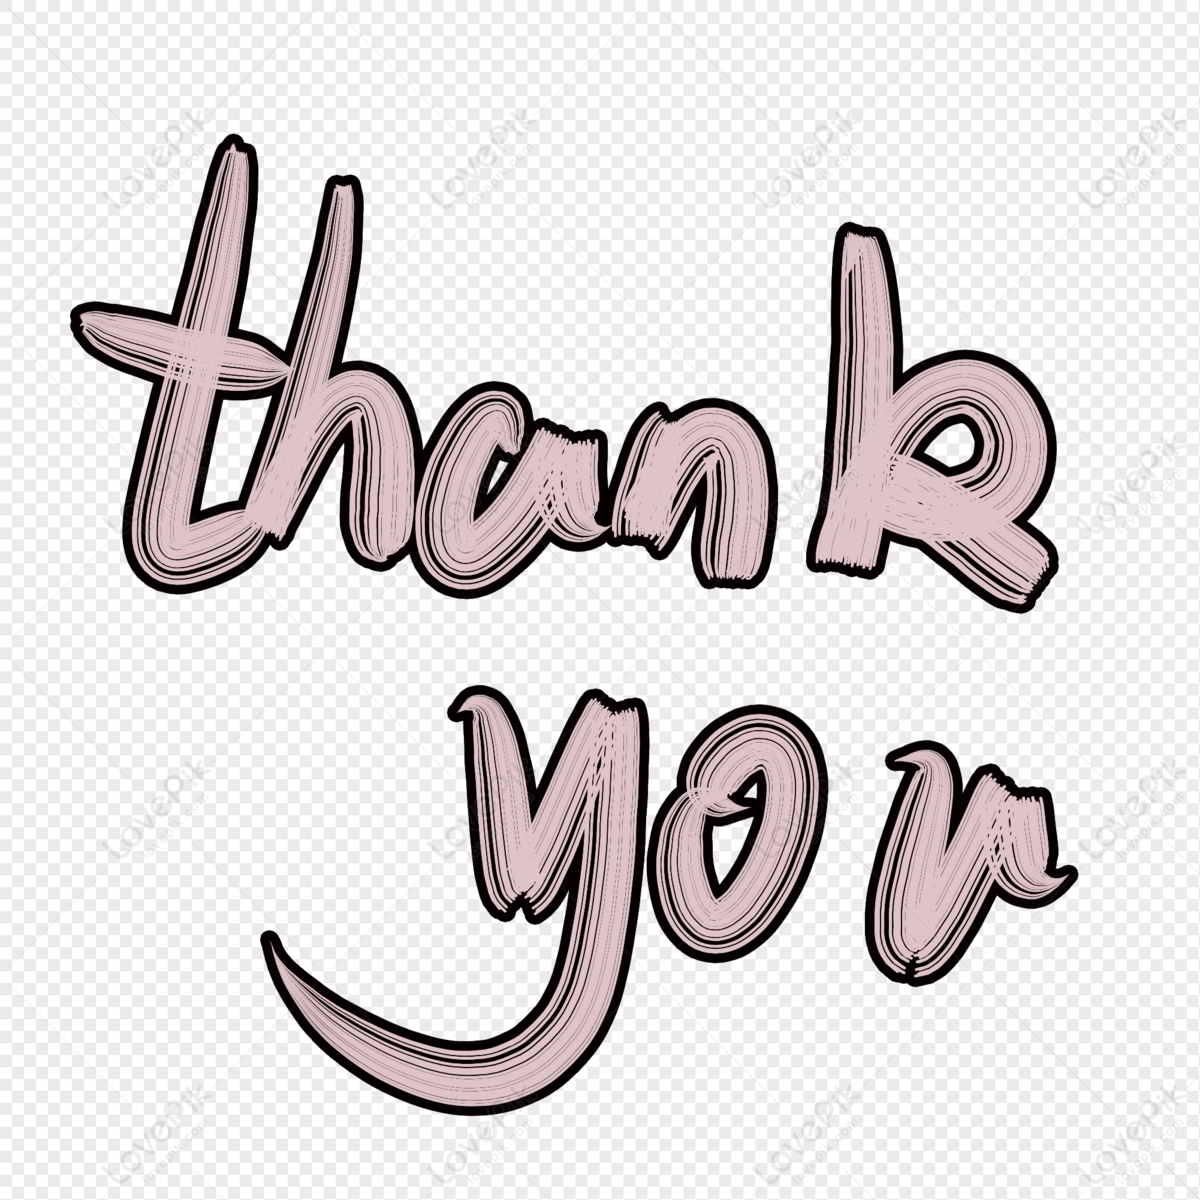 Thank You PNG Transparent Images Free Download